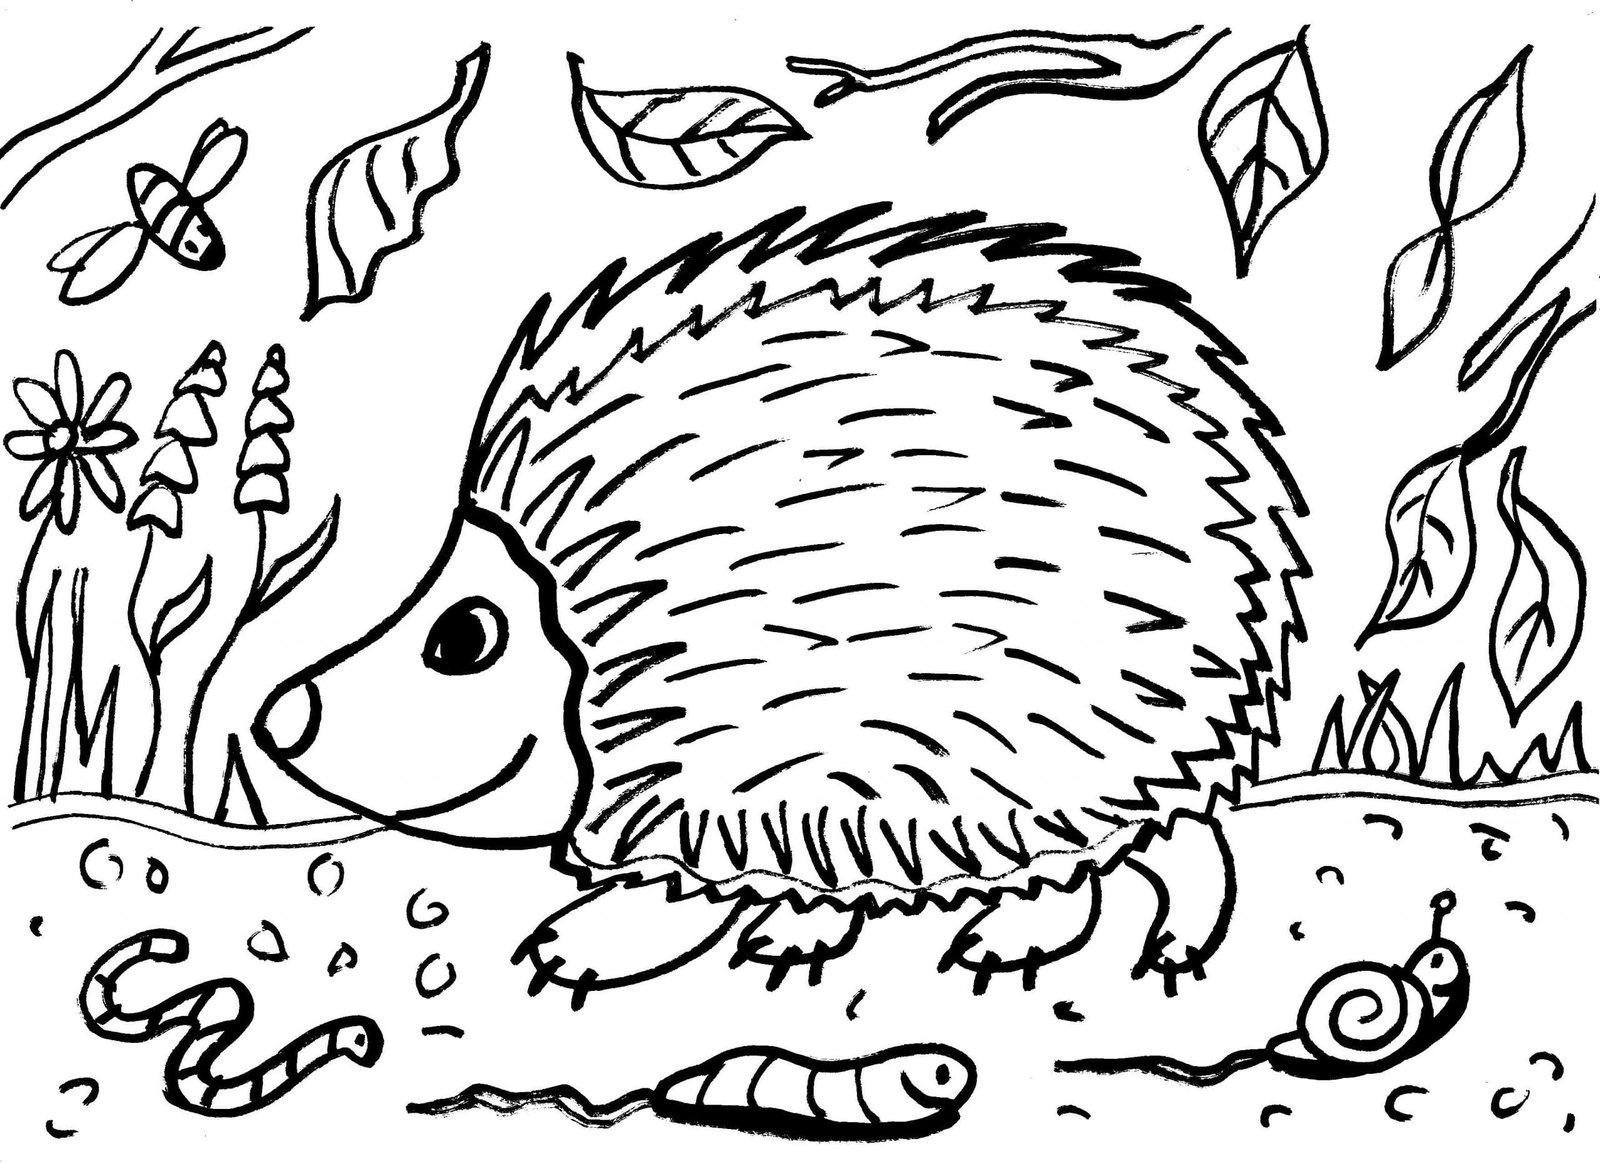 Hedgehog Colouring Sheet Lesson Planned A Marketplace For Teaching